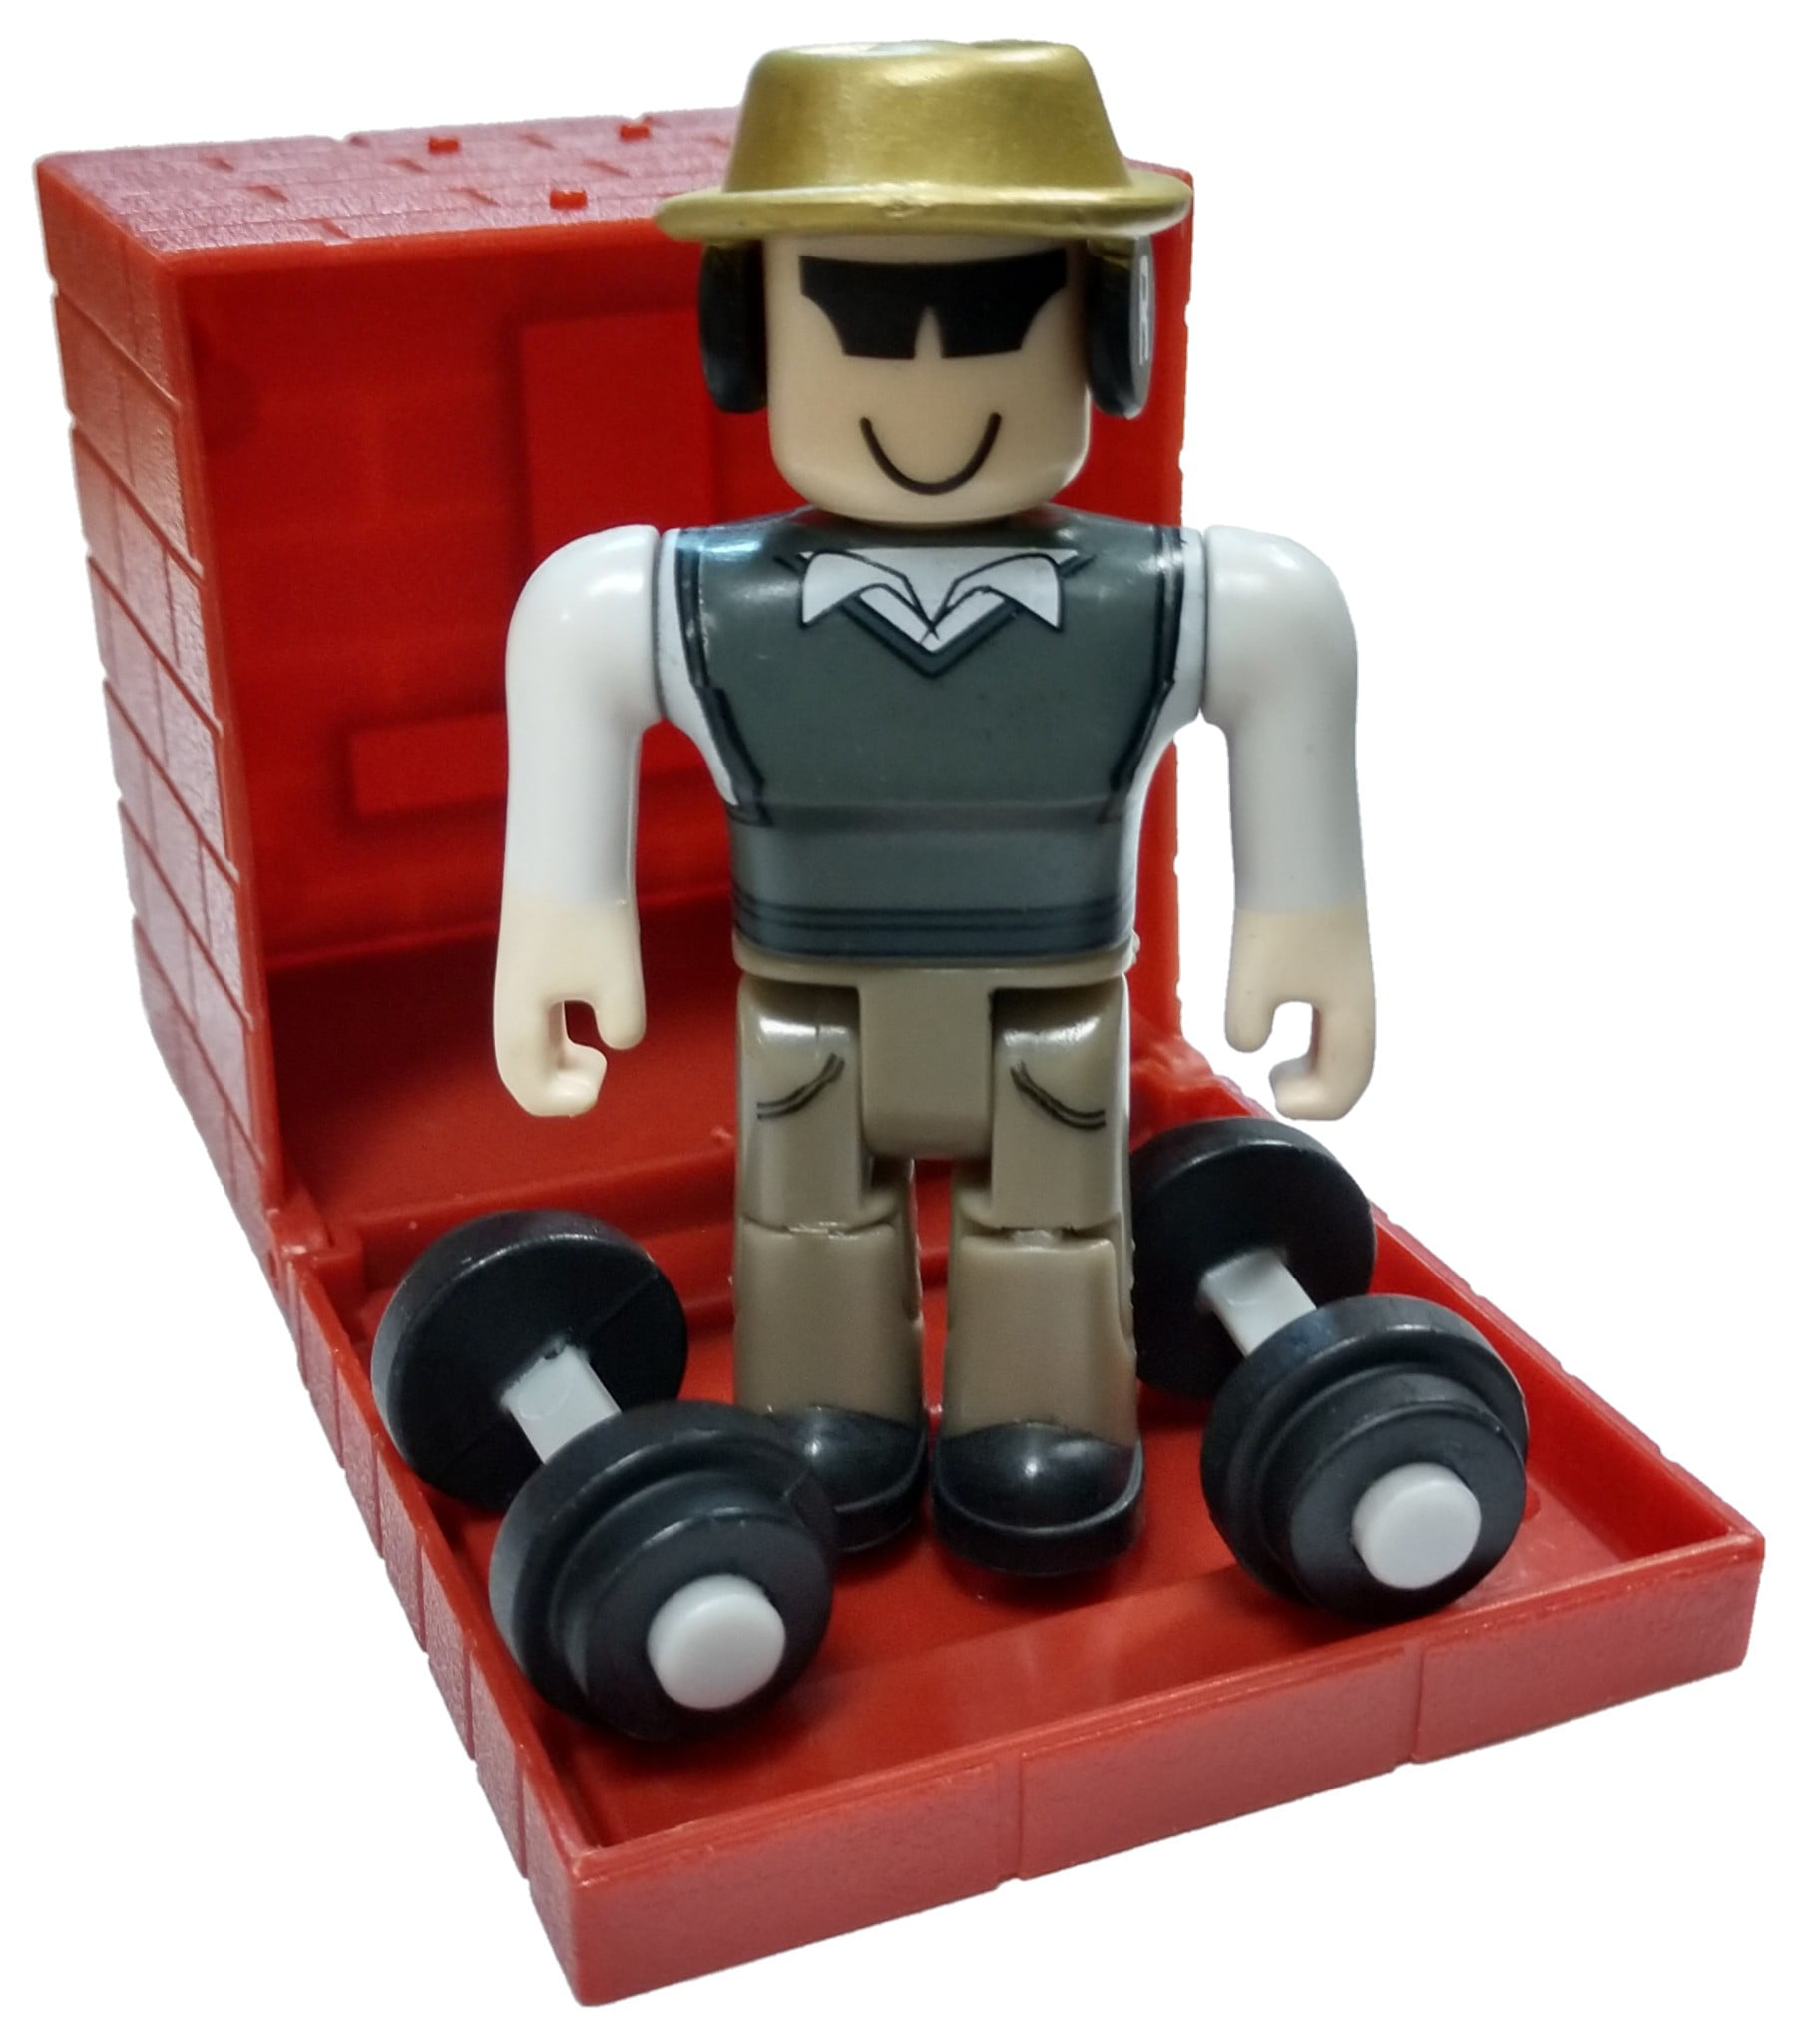 Roblox Red Series 4 Badcc Mini Figure With Red Cube And Online Code No Packaging Walmart Com Walmart Com - badcc roblox